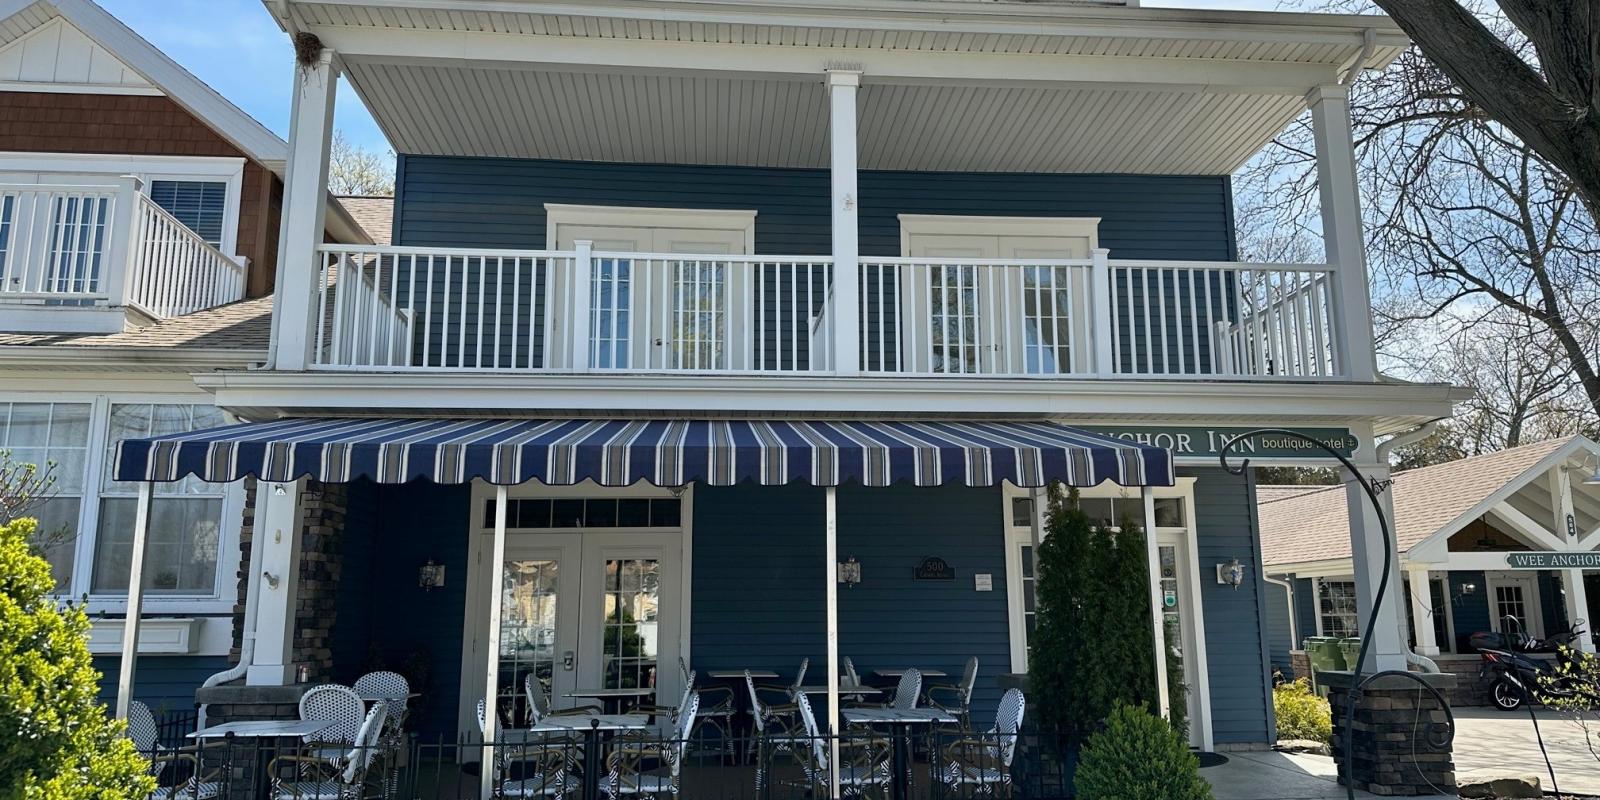 Image of Anchor Inn Boutique Hotel, Put-in-Bay, Ohio